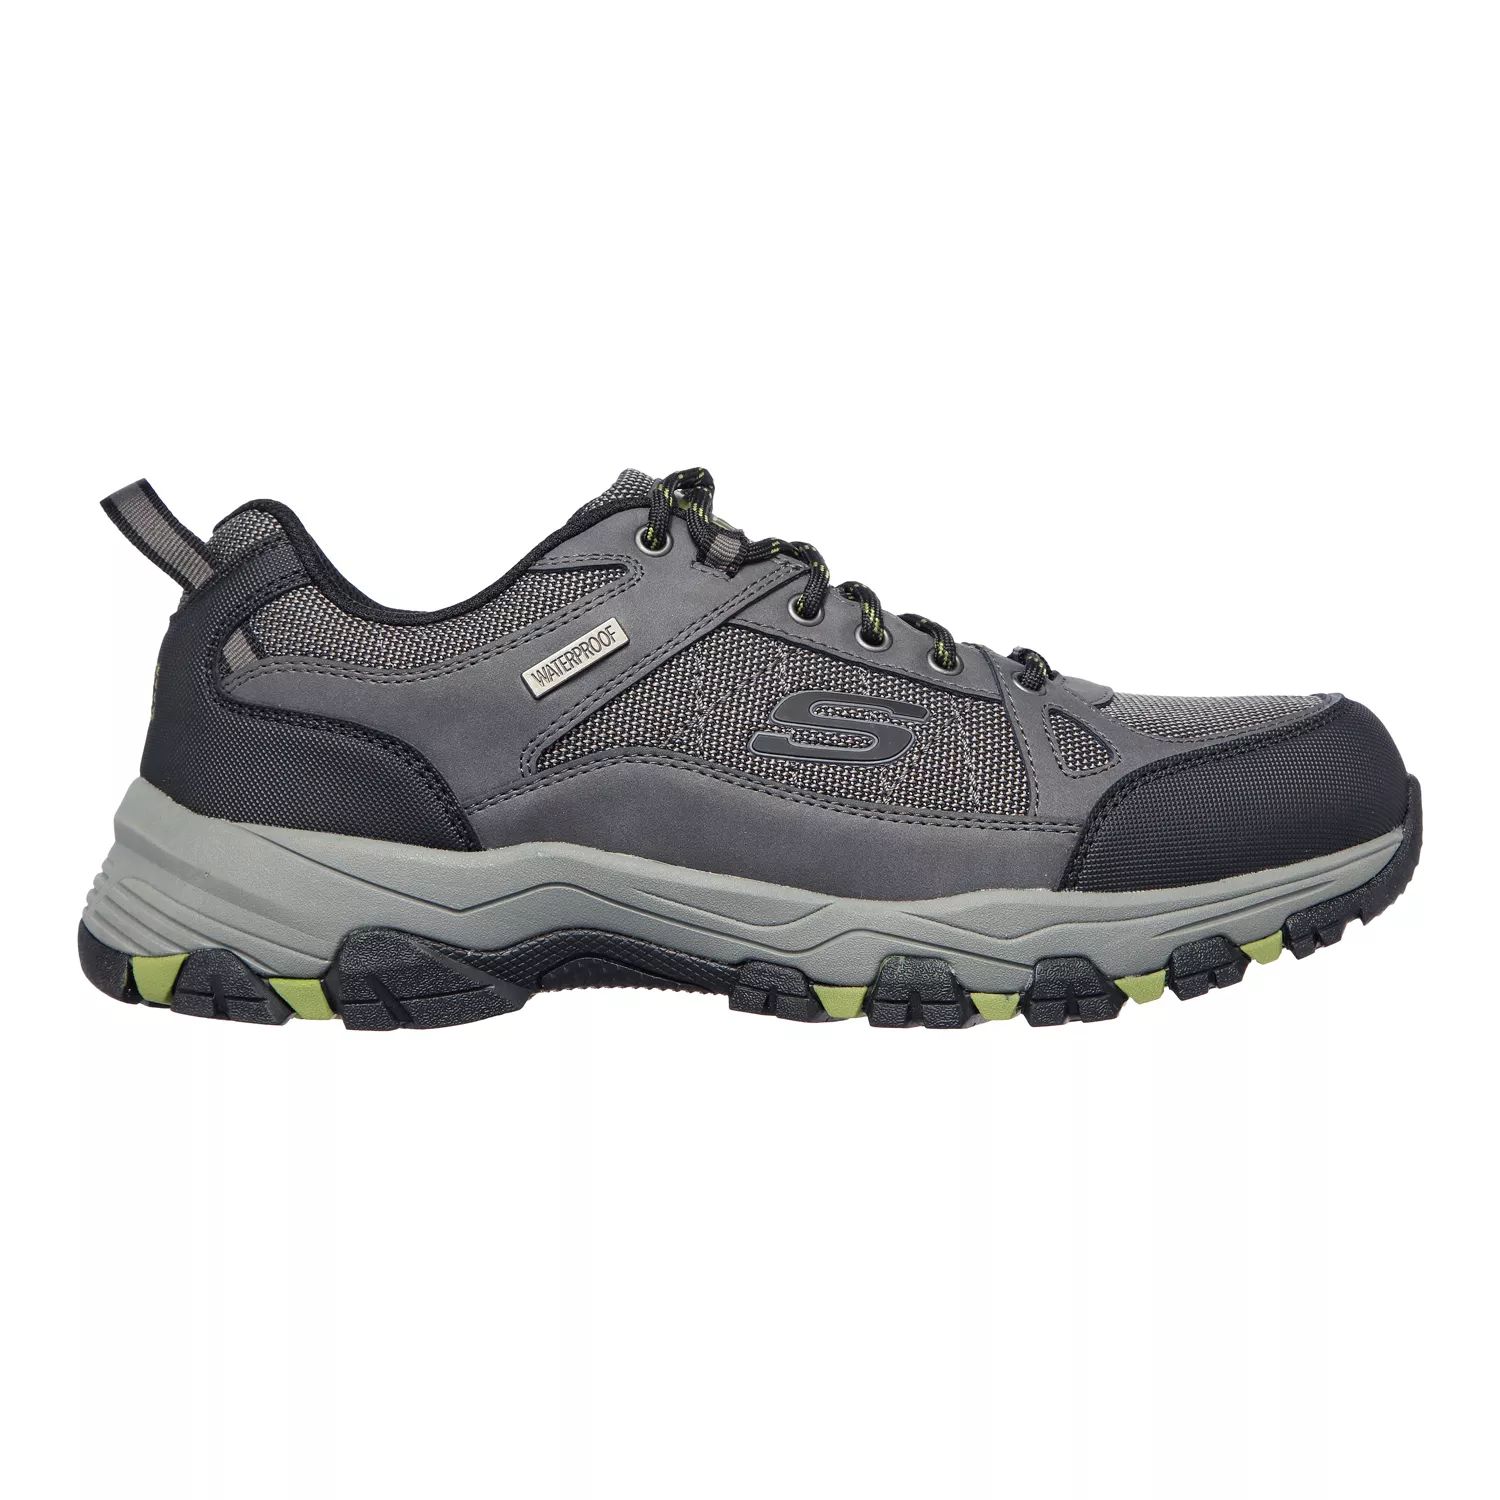 Мужские водонепроницаемые кроссовки Skechers Relaxed Fit Selmen Cormack кроссовки skechers selmen cormack charcoal